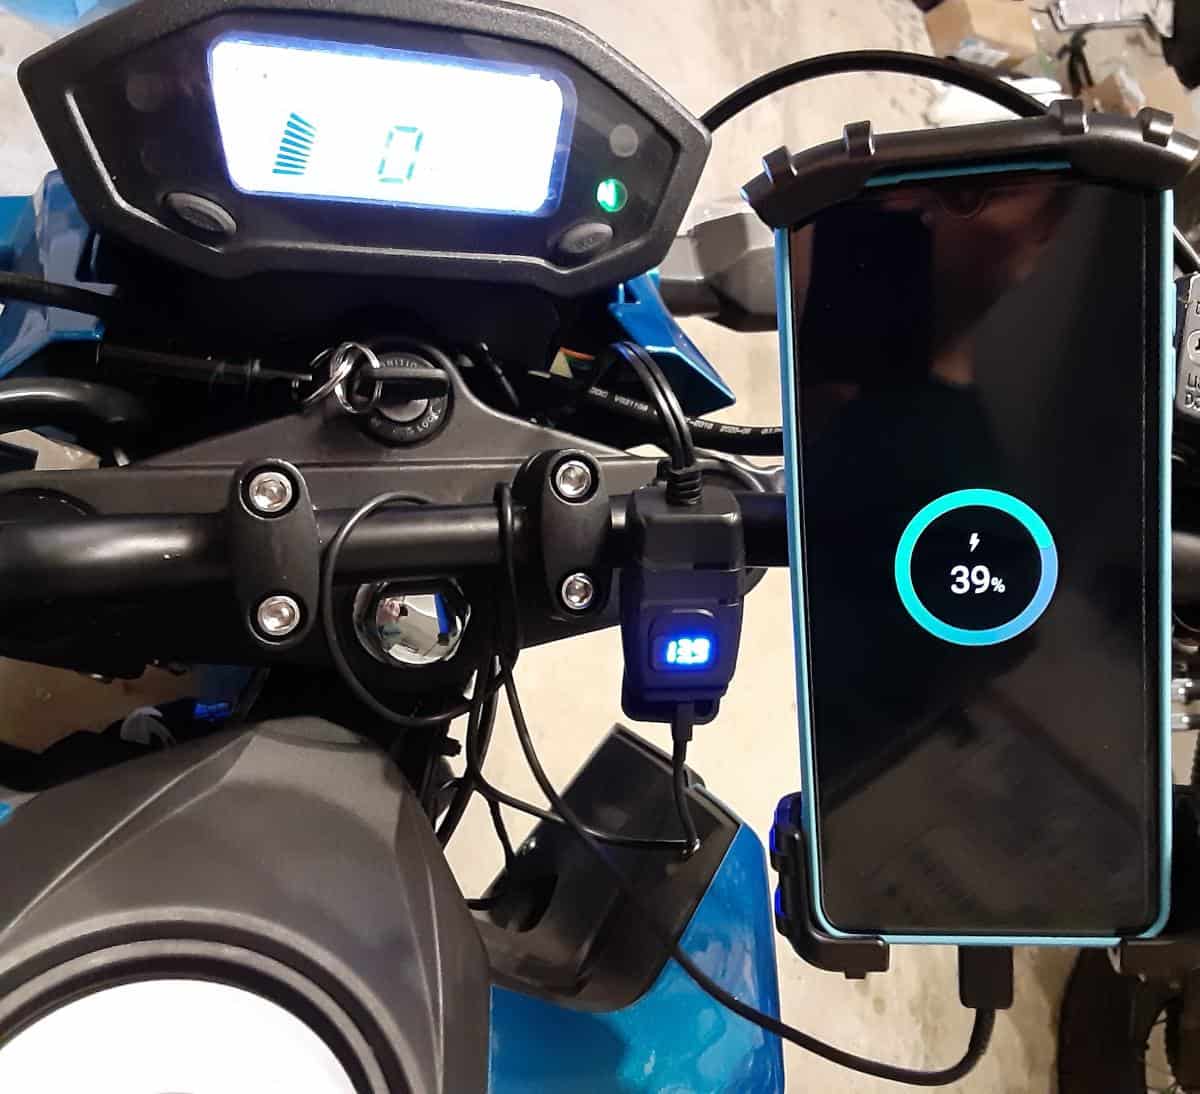 My Boom Vader Motorcycle's dual usb cell phone charger.